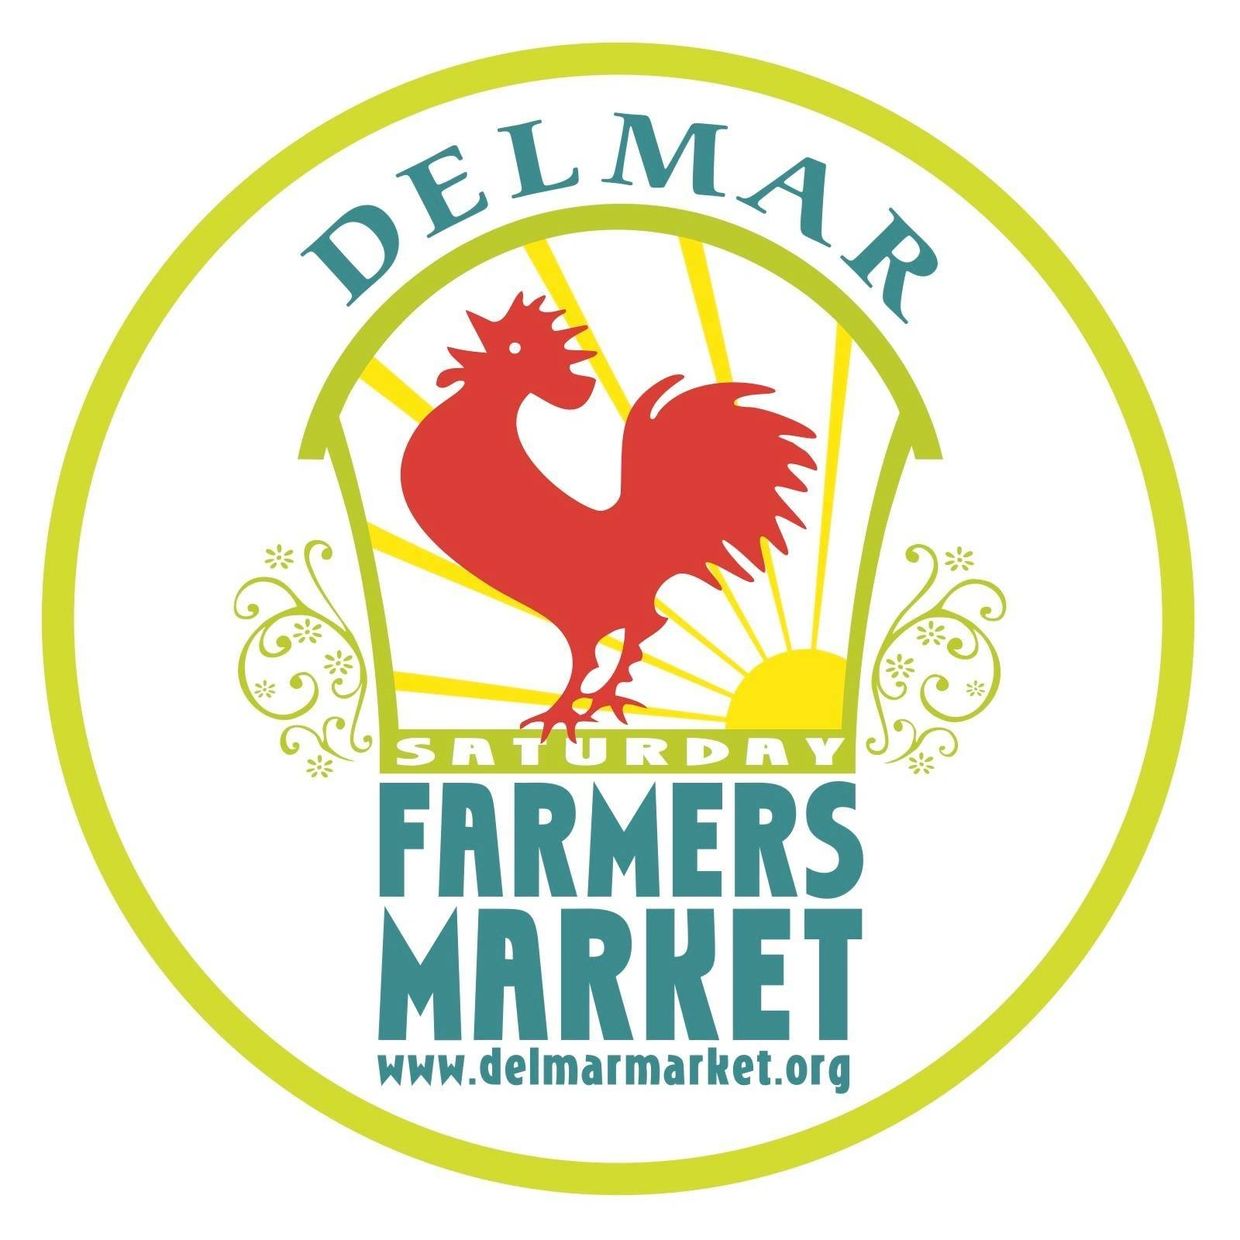 We will be featuring our products all Summer at the Delmar Farmers Market!